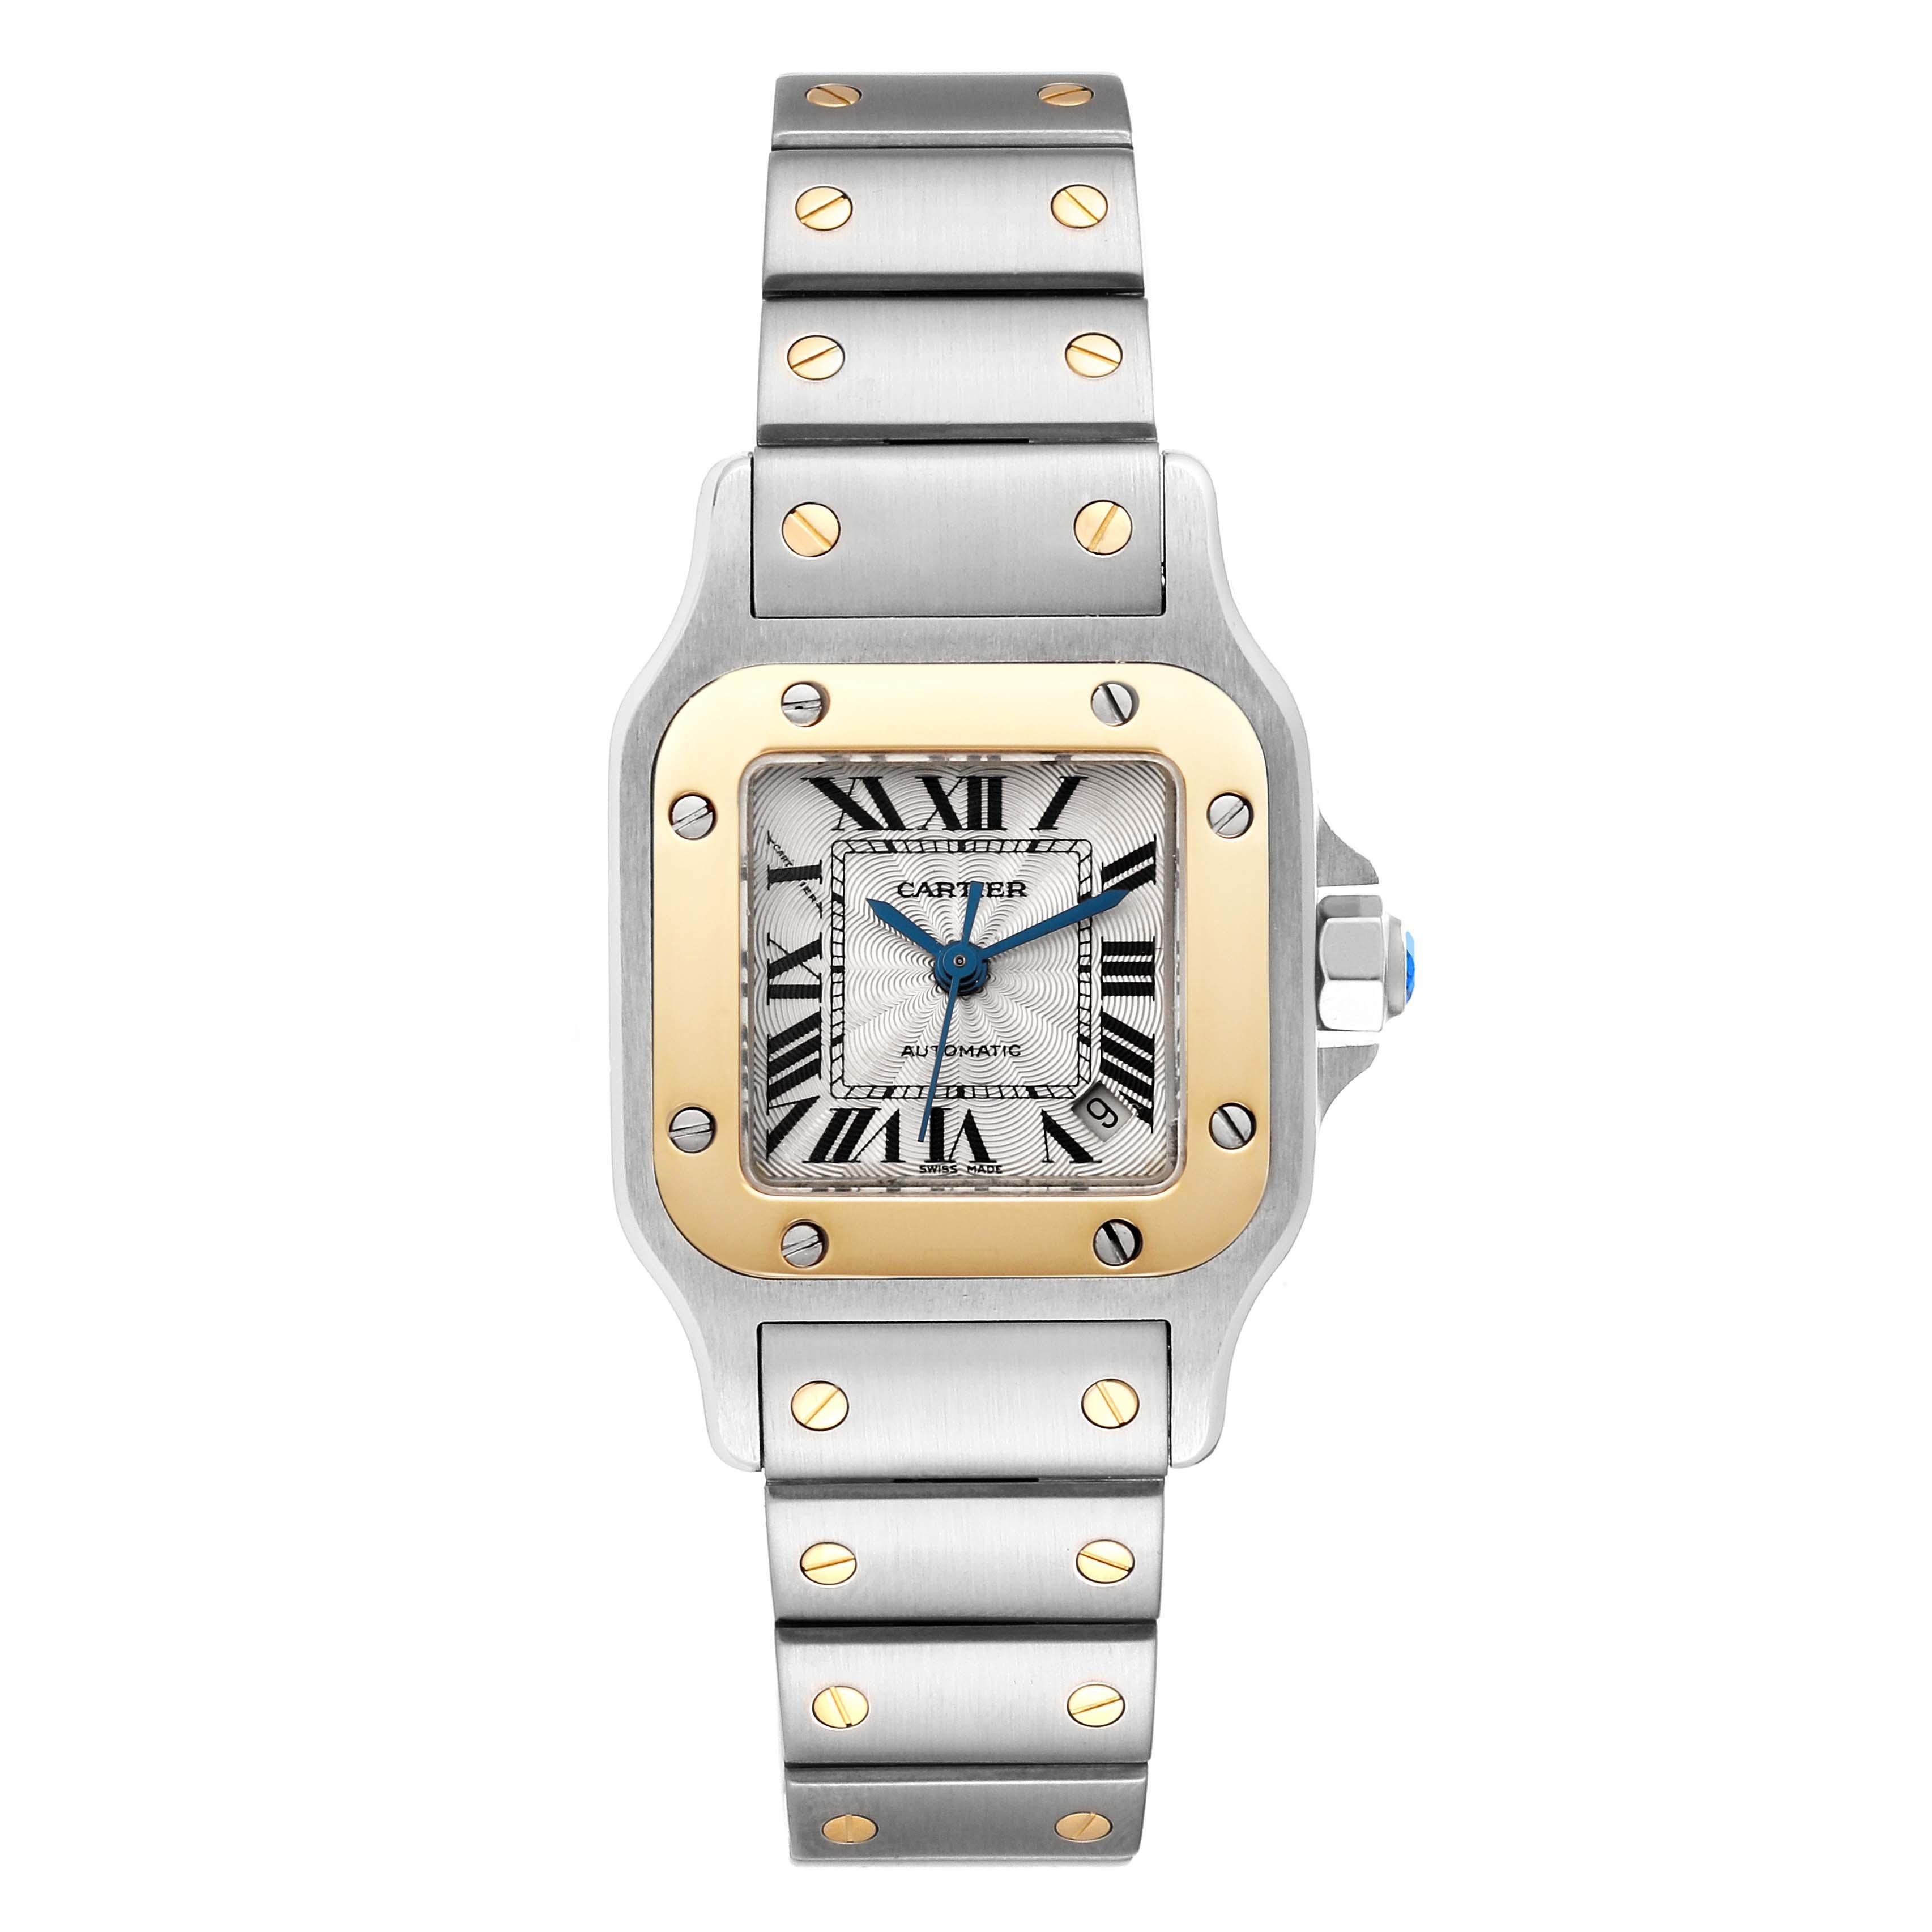 Cartier Santos Galbee Steel Yellow Gold Ladies Watch W20057C4. Automatic self-winding movement. Stainless steel case 24.0 x 24.0 mm. Steel octagonal crown set with blue faceted spinel. 18k yellow gold bezel punctuated with 8 signature screws.